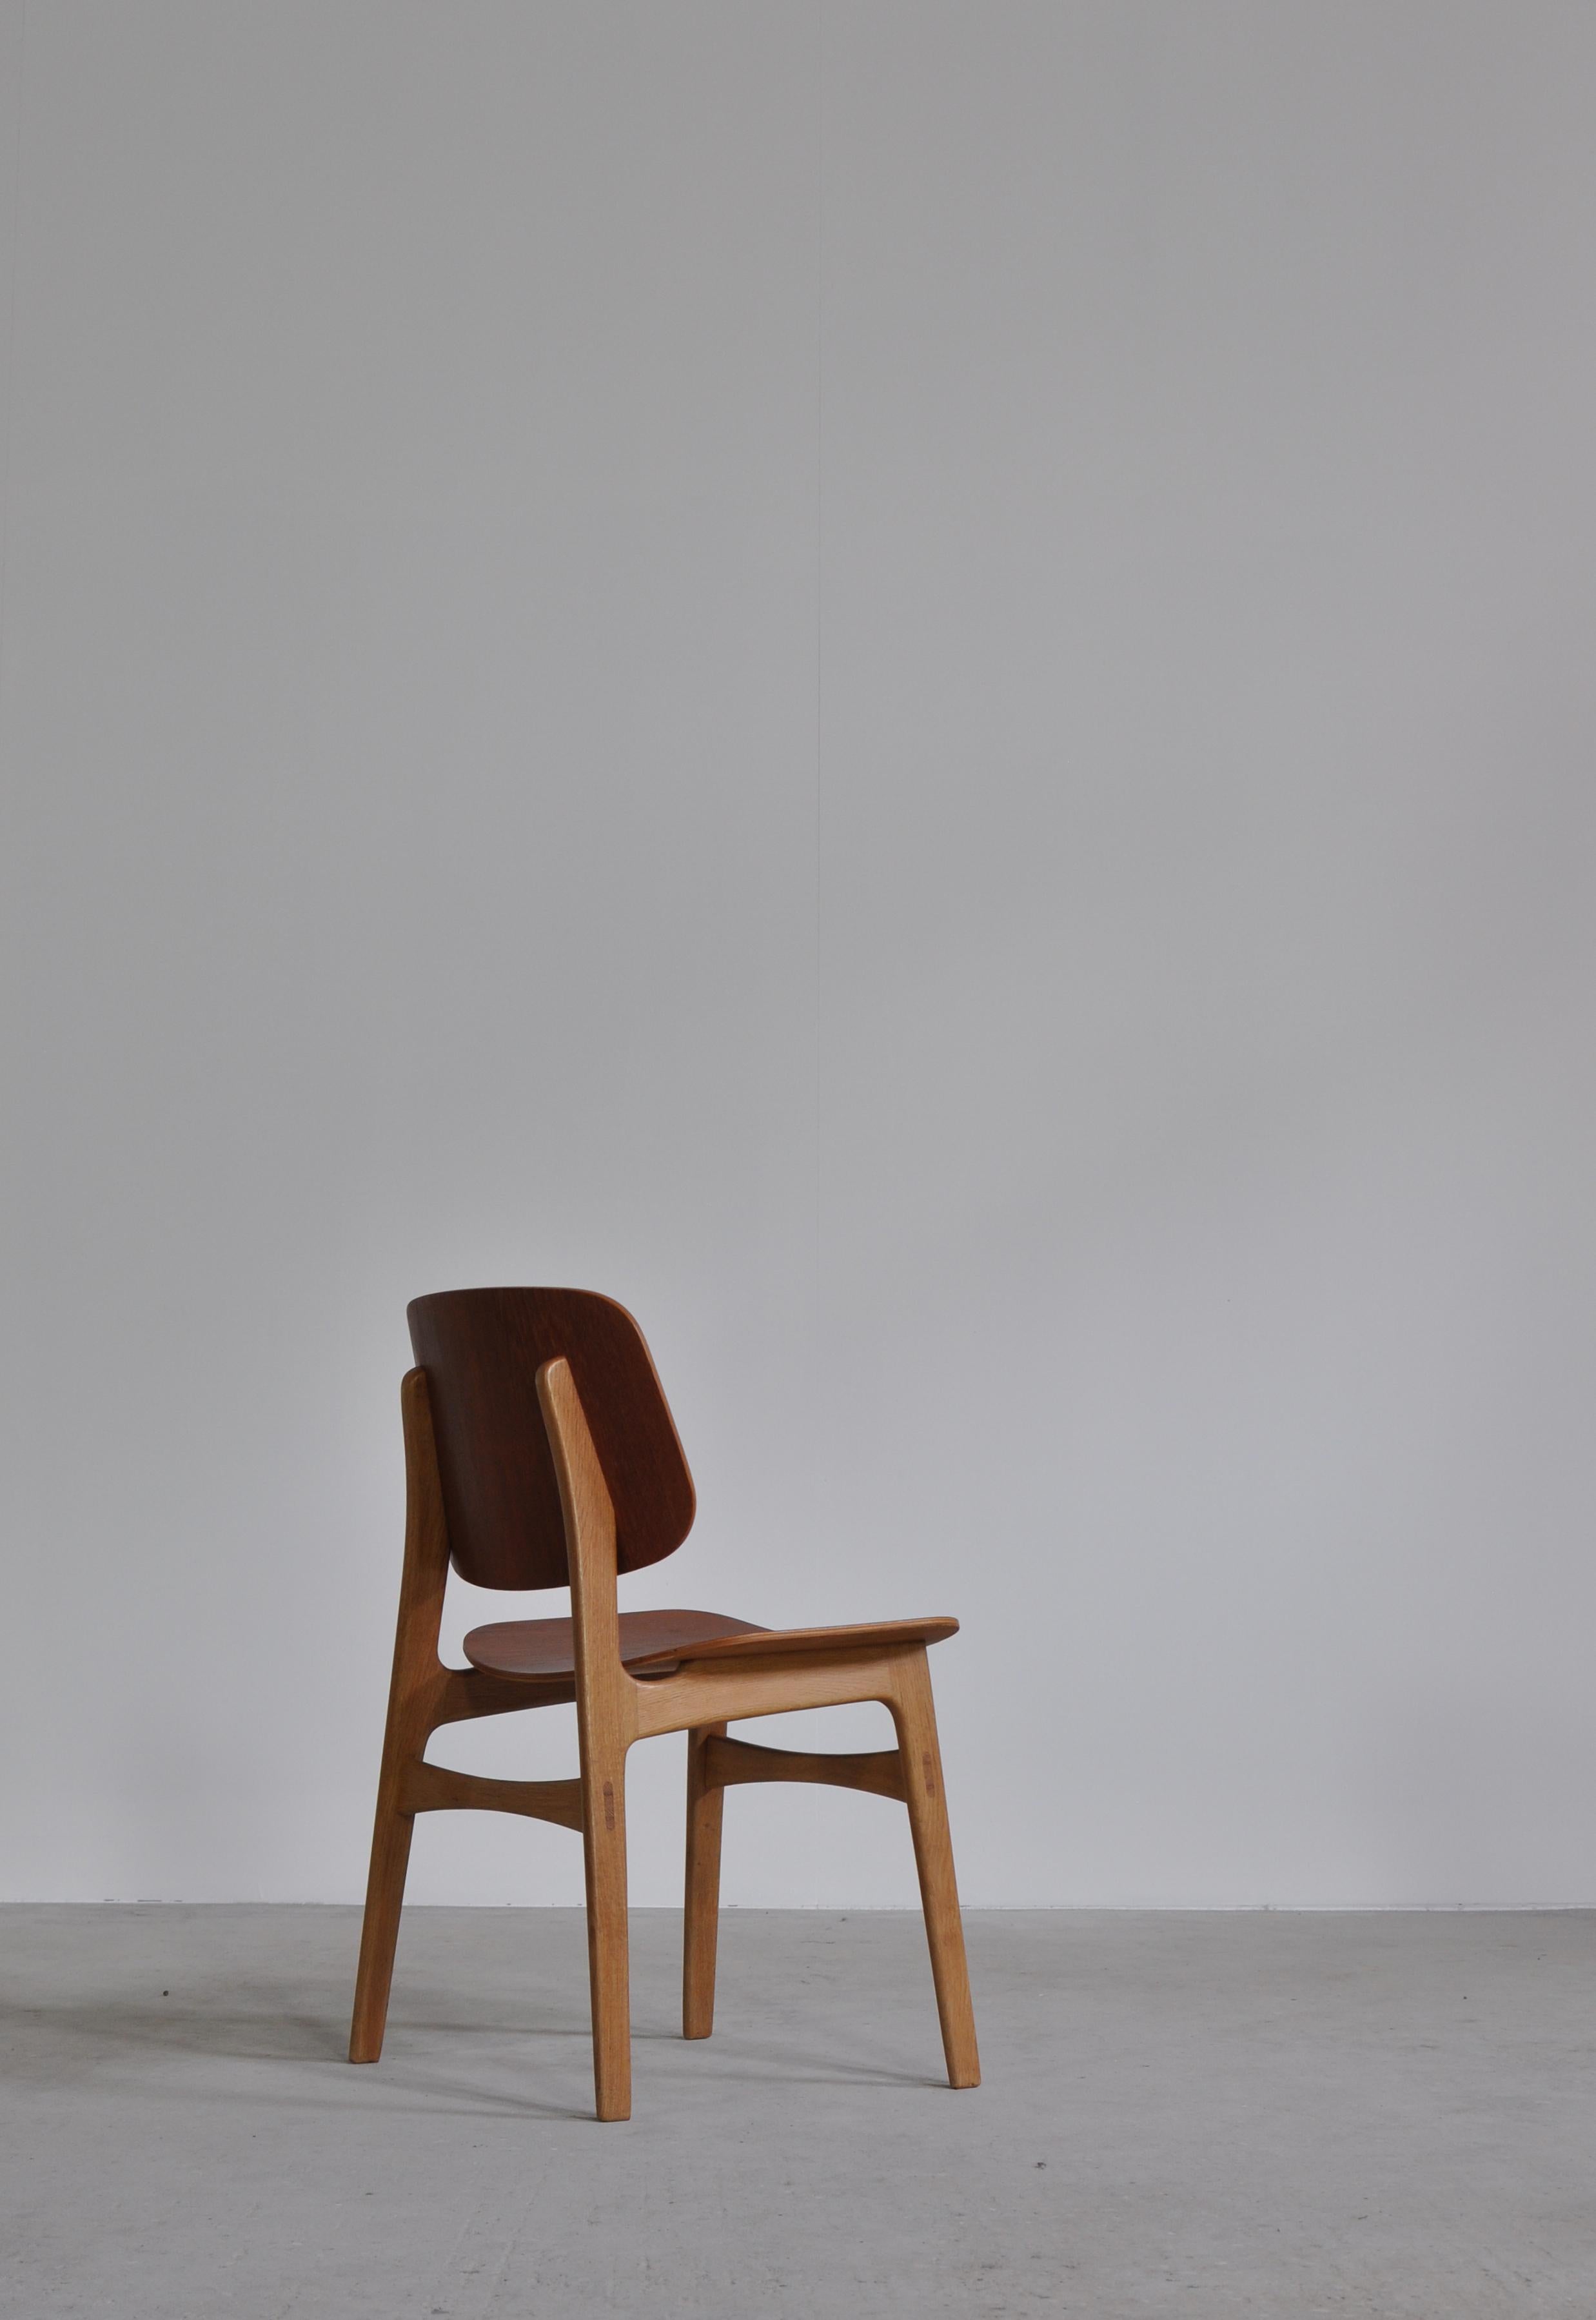 Iconic Danish modern side chair by Børge Mogensen. One of Mogensens most famous designs and a true Classic is this elegant and minimalistic chair in solid oak frame with plywood teak back and seat. Made in the 1950s at 